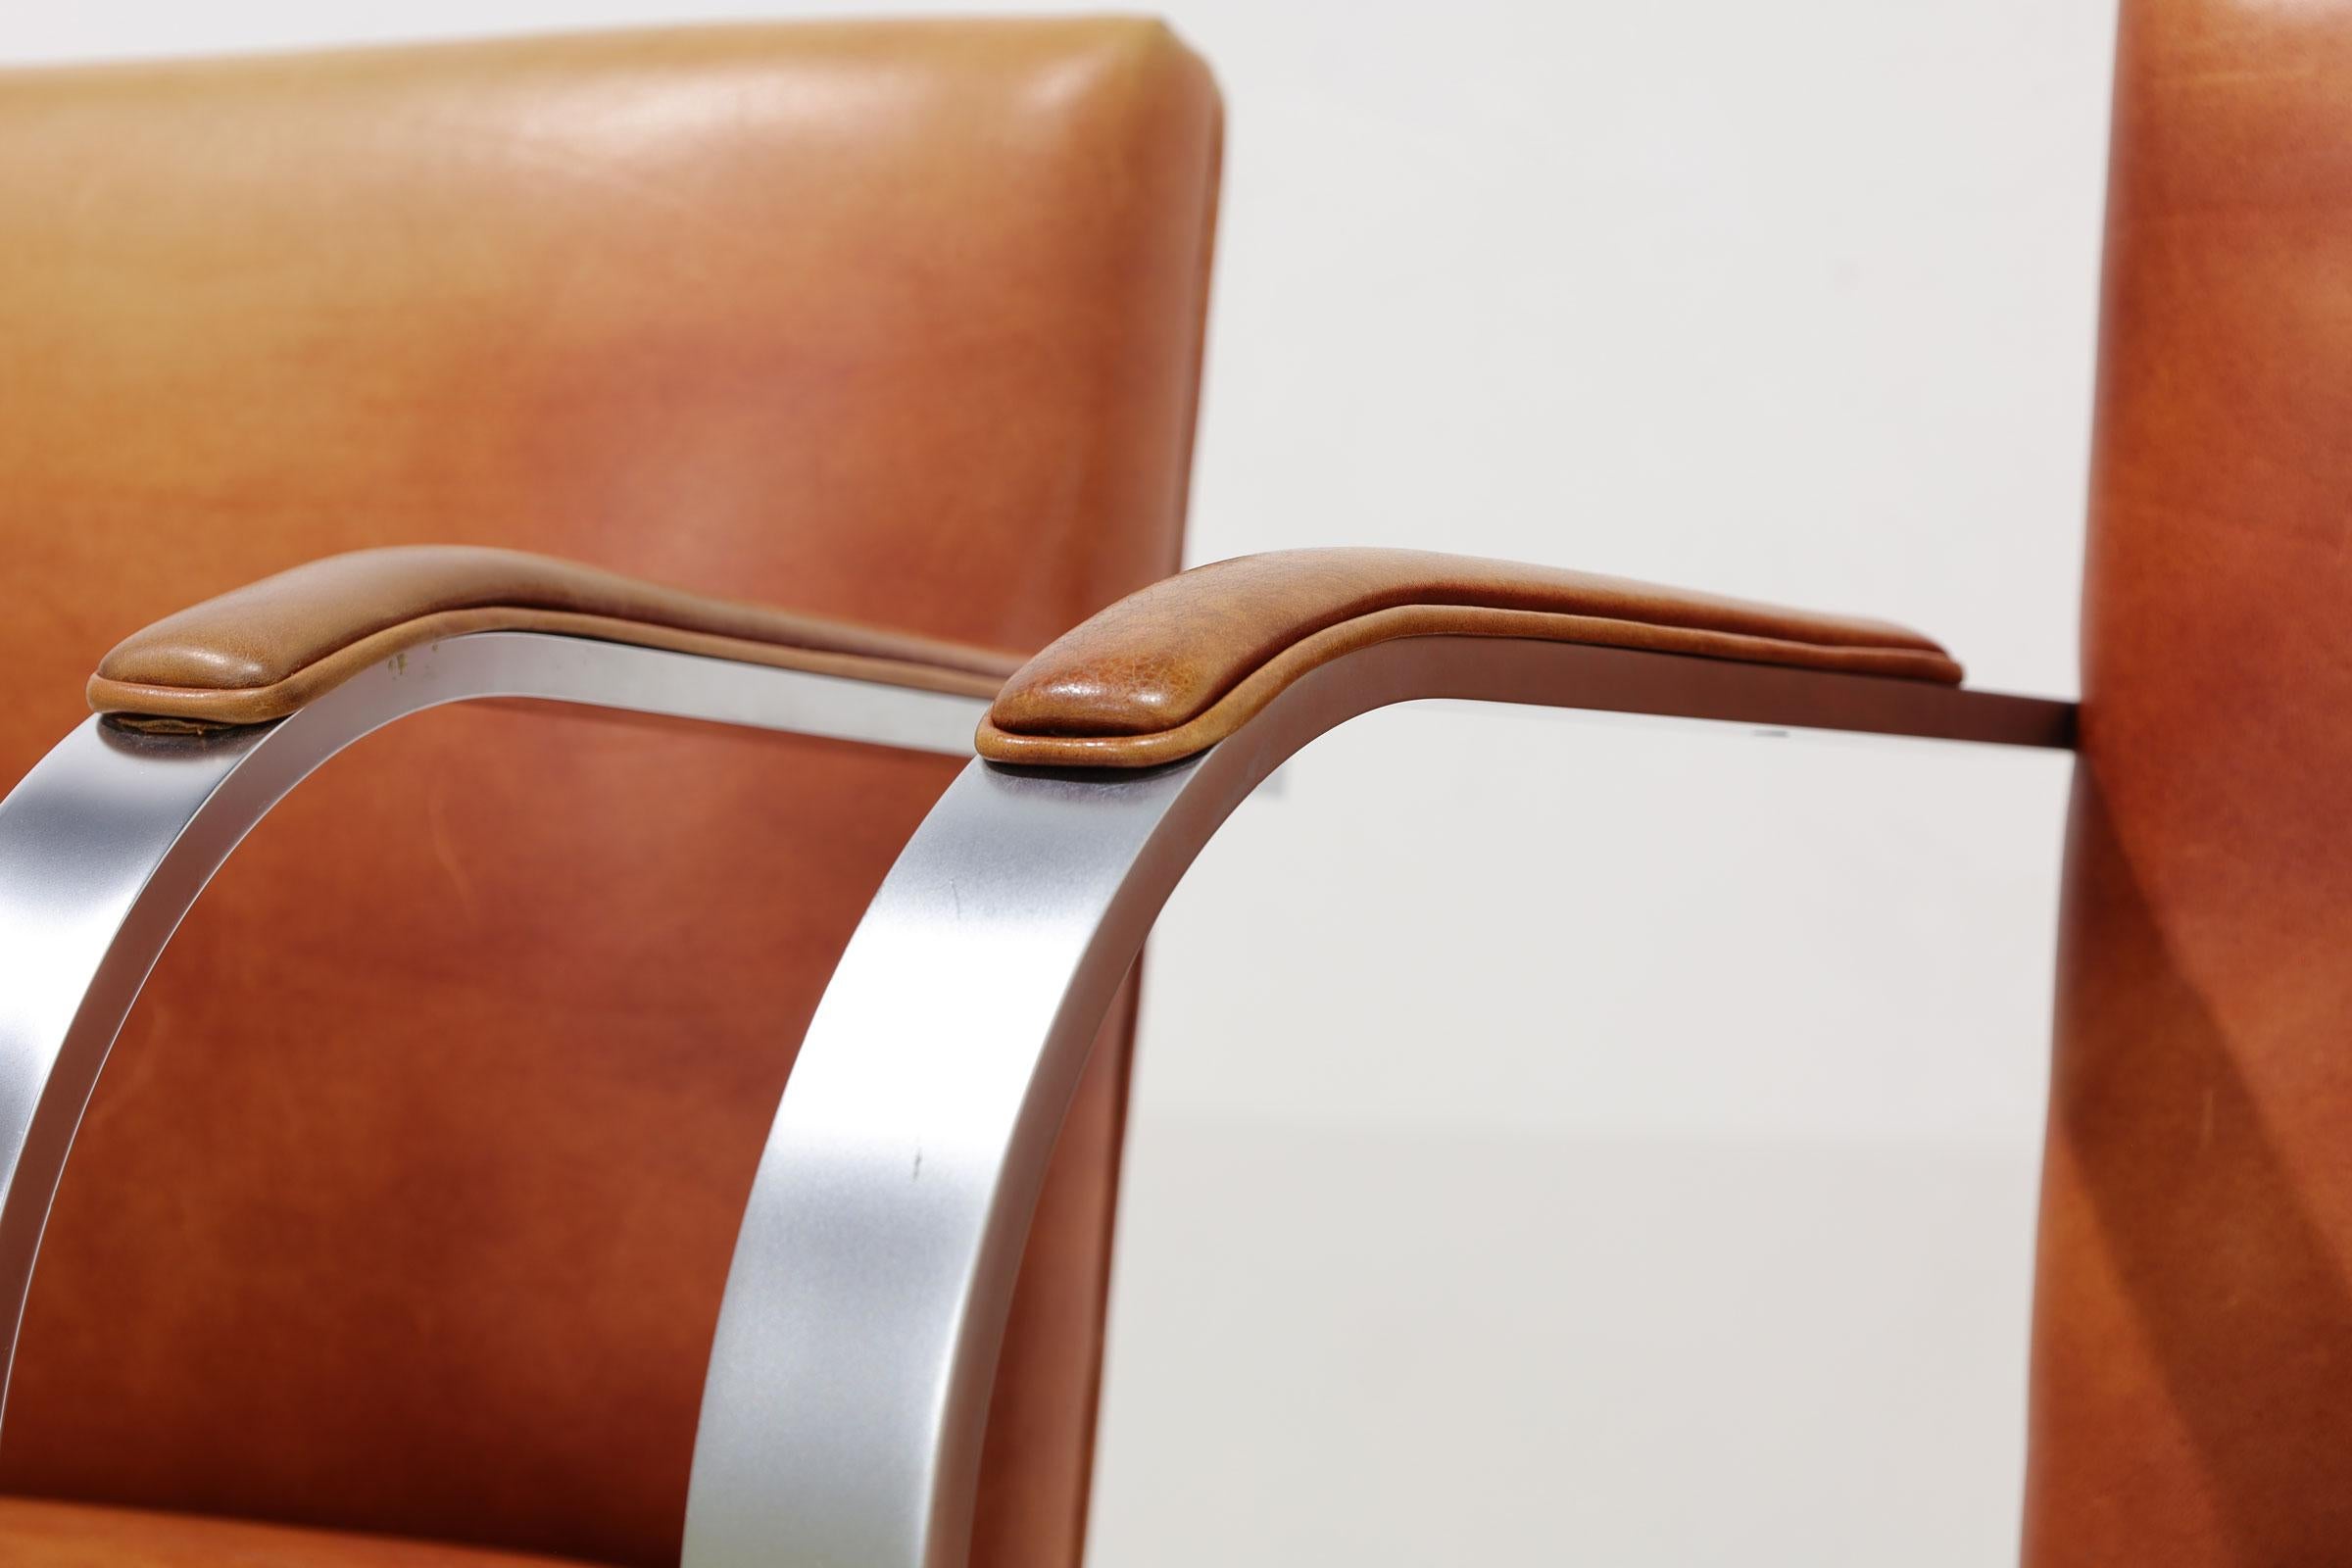 We have up to 20 Brno chairs by Mies van der Rohe for Knoll. They are upholstered in a distressed leather and have arm pads. Frame is a unique brushed steel. Chairs are stamped Knoll Studio.